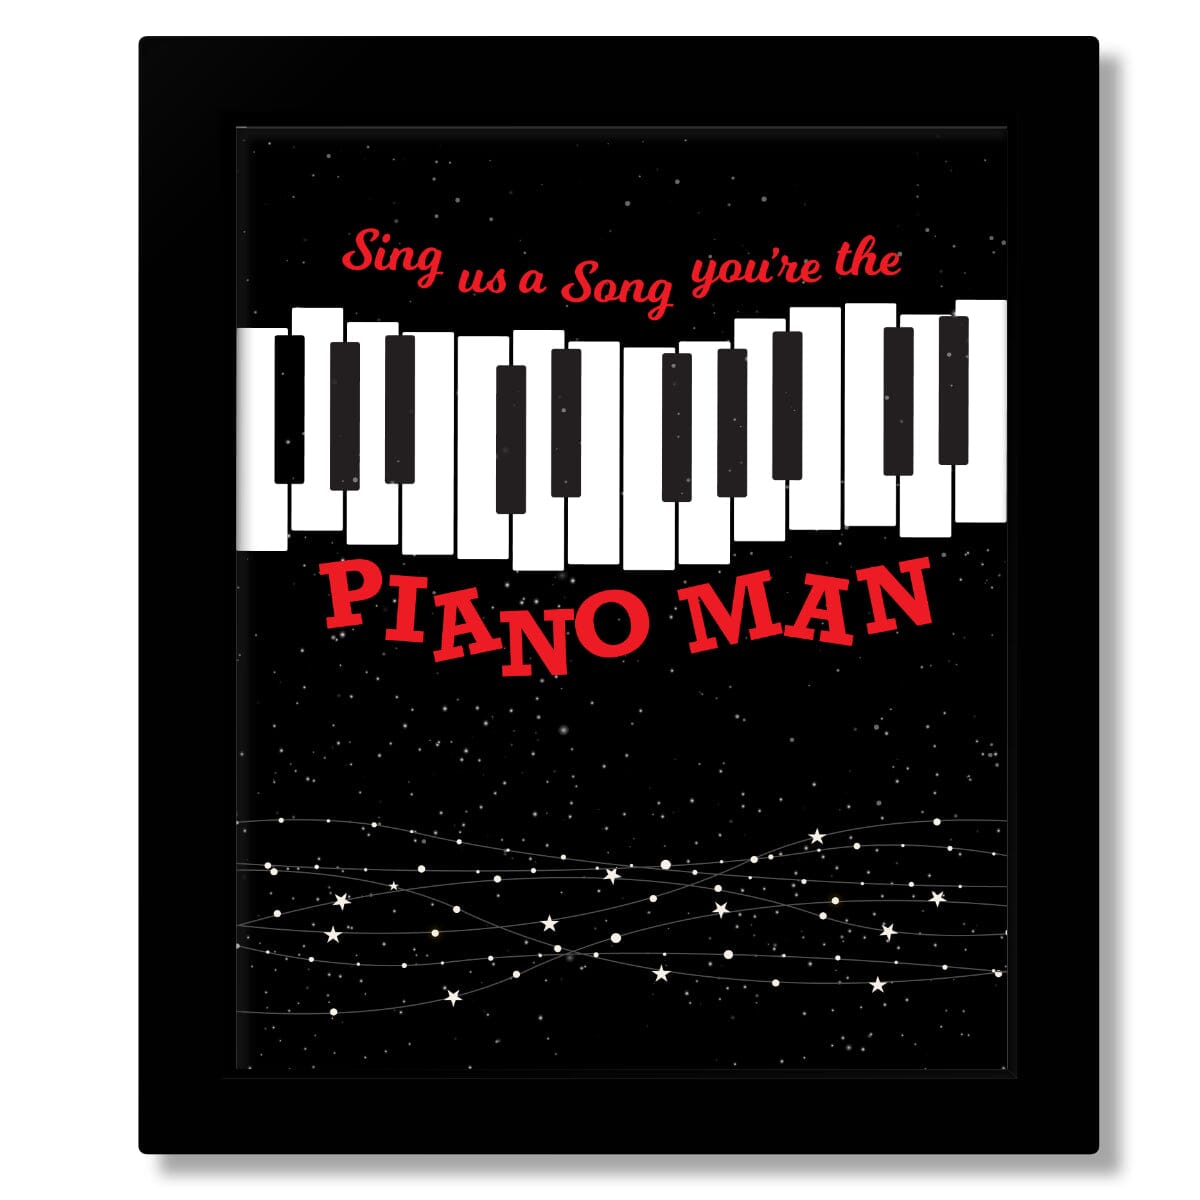 Piano Man by Billy Joel - Classic Rock Art Song Lyrics Print Song Lyrics Art Song Lyrics Art 8x10 Framed Print (without mat) 